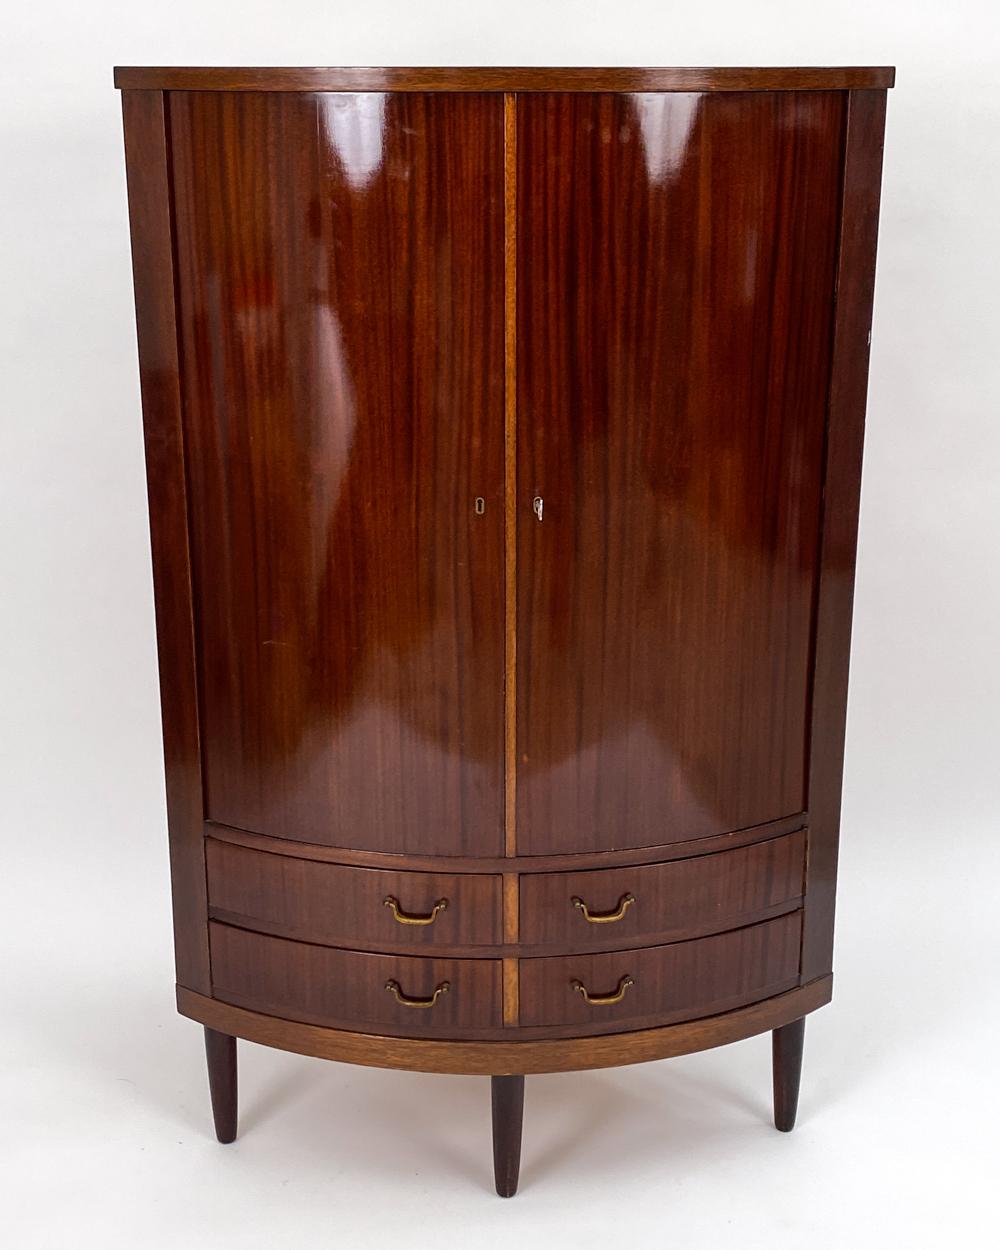 A handsome Danish mid-century corner cabinet with a rounded front, in the manner of Frits Henningsen's traditional-leaning designs. In rich, beautifully grained mahogany, this cabinet oozes elegance. c. 1960's. Including key.